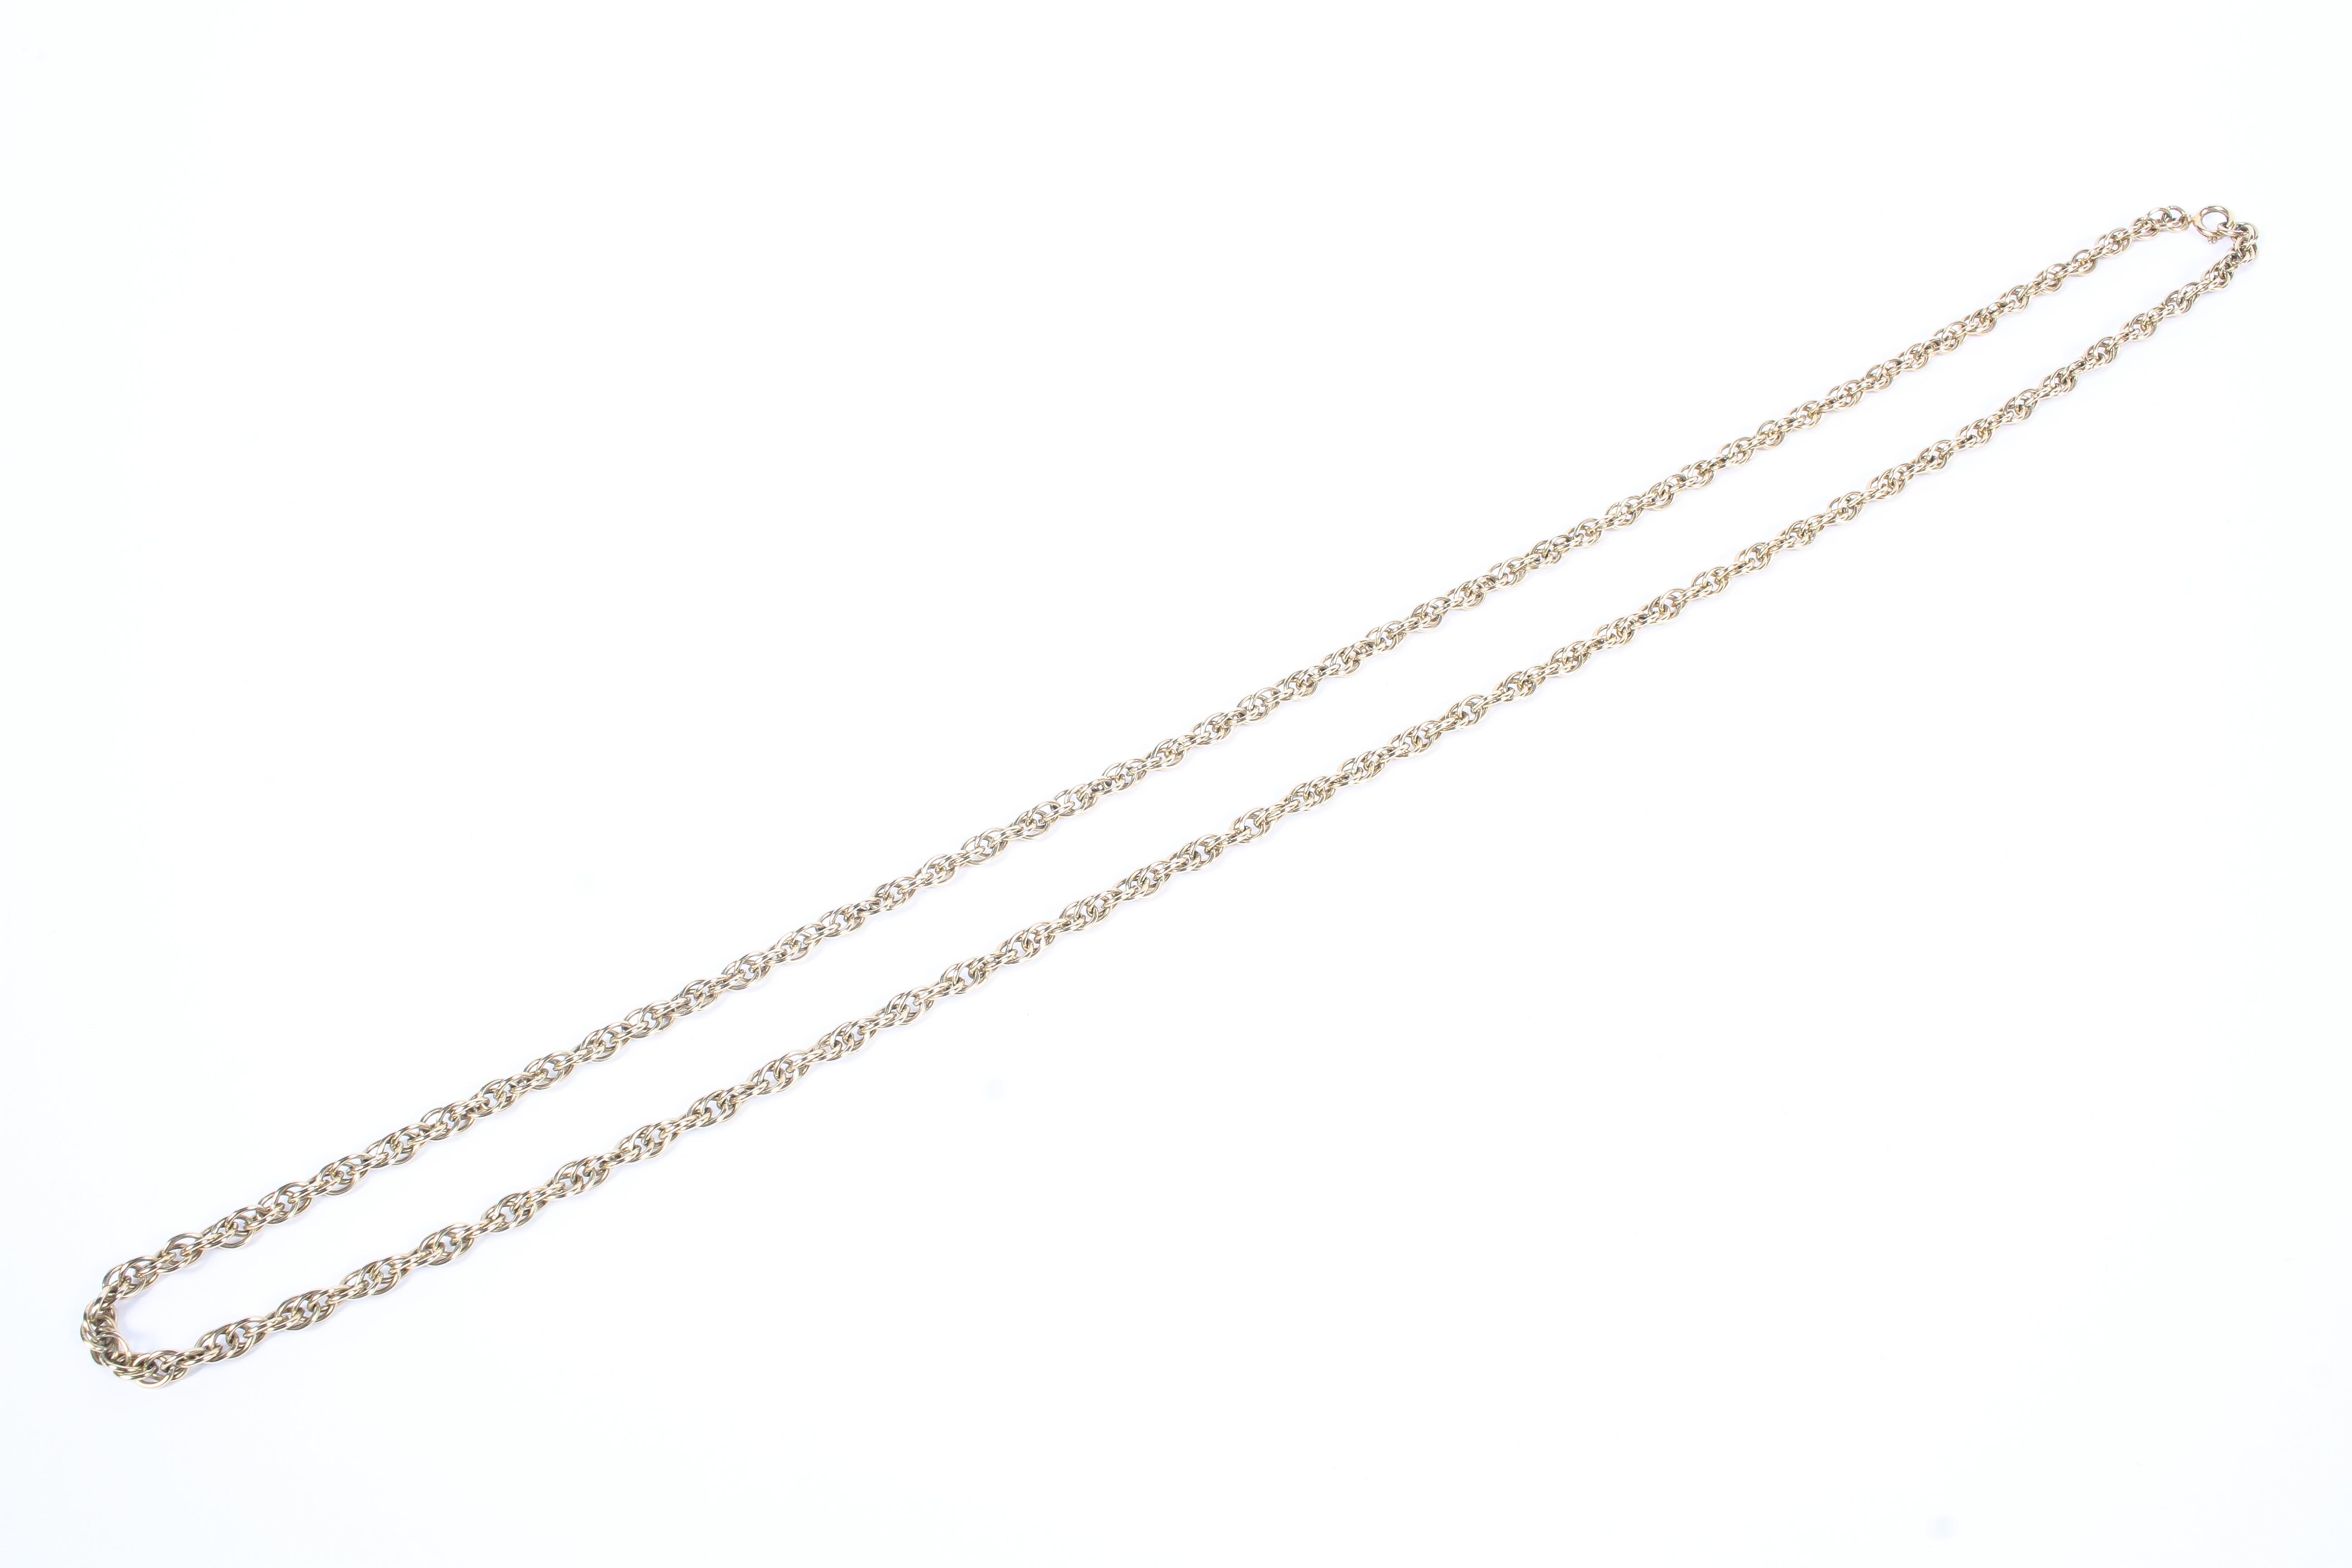 A 9ct gold rope twist necklace. 31g. 74cm.